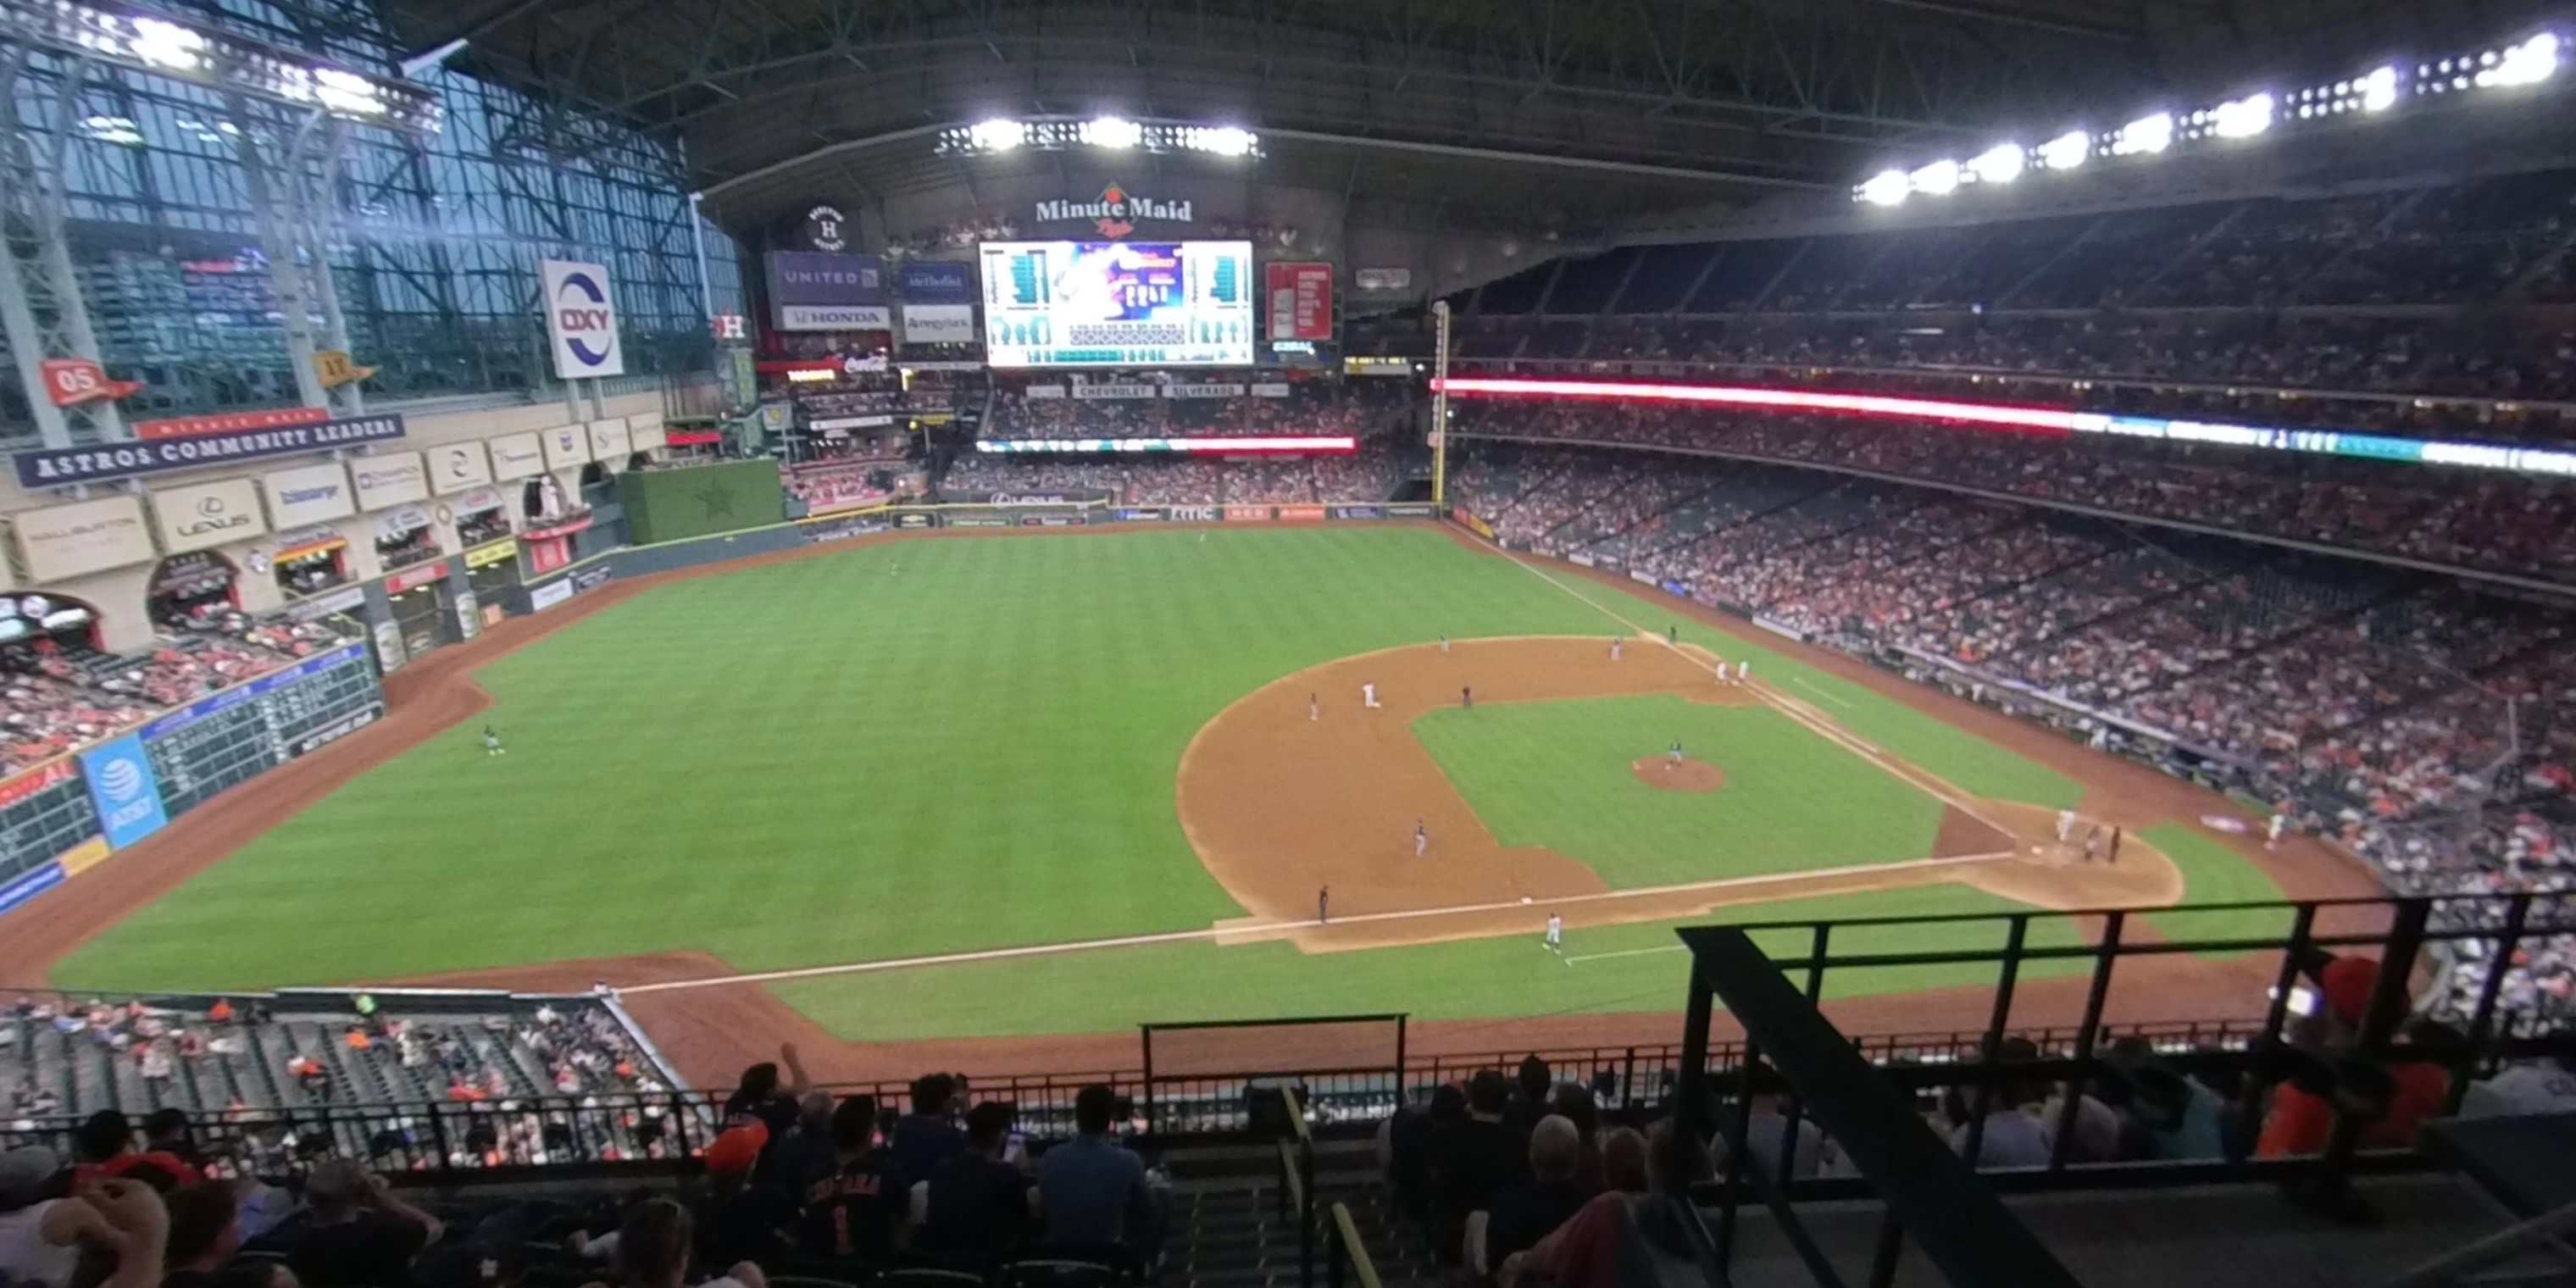 Minute Maid Park, section 105, home of Houston Astros, page 1